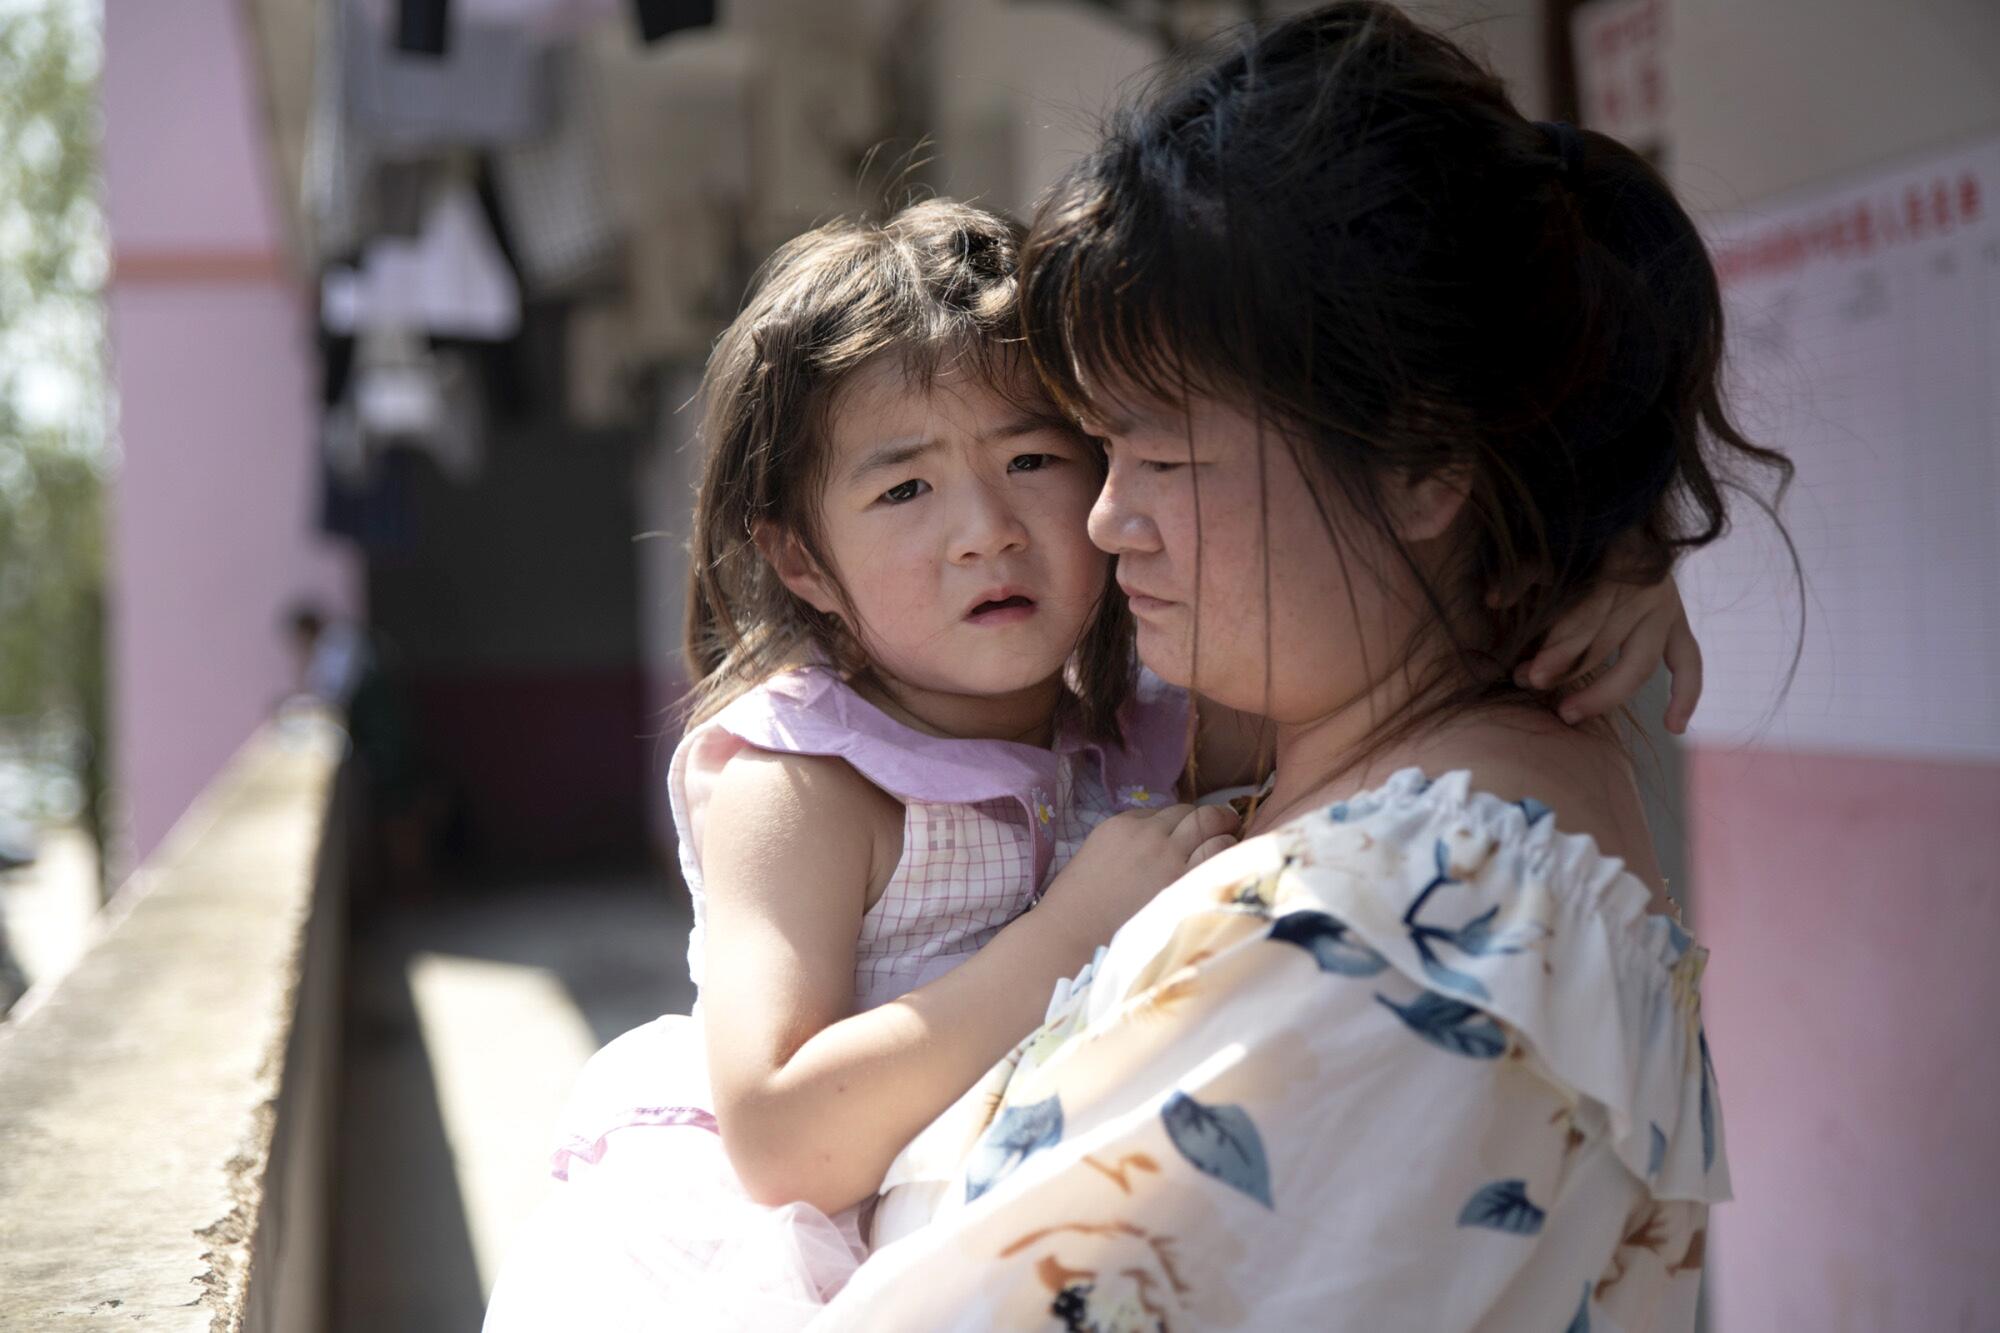 Mrs. Huang holds her daughter Huang Minfang, who is afraid of the floods.